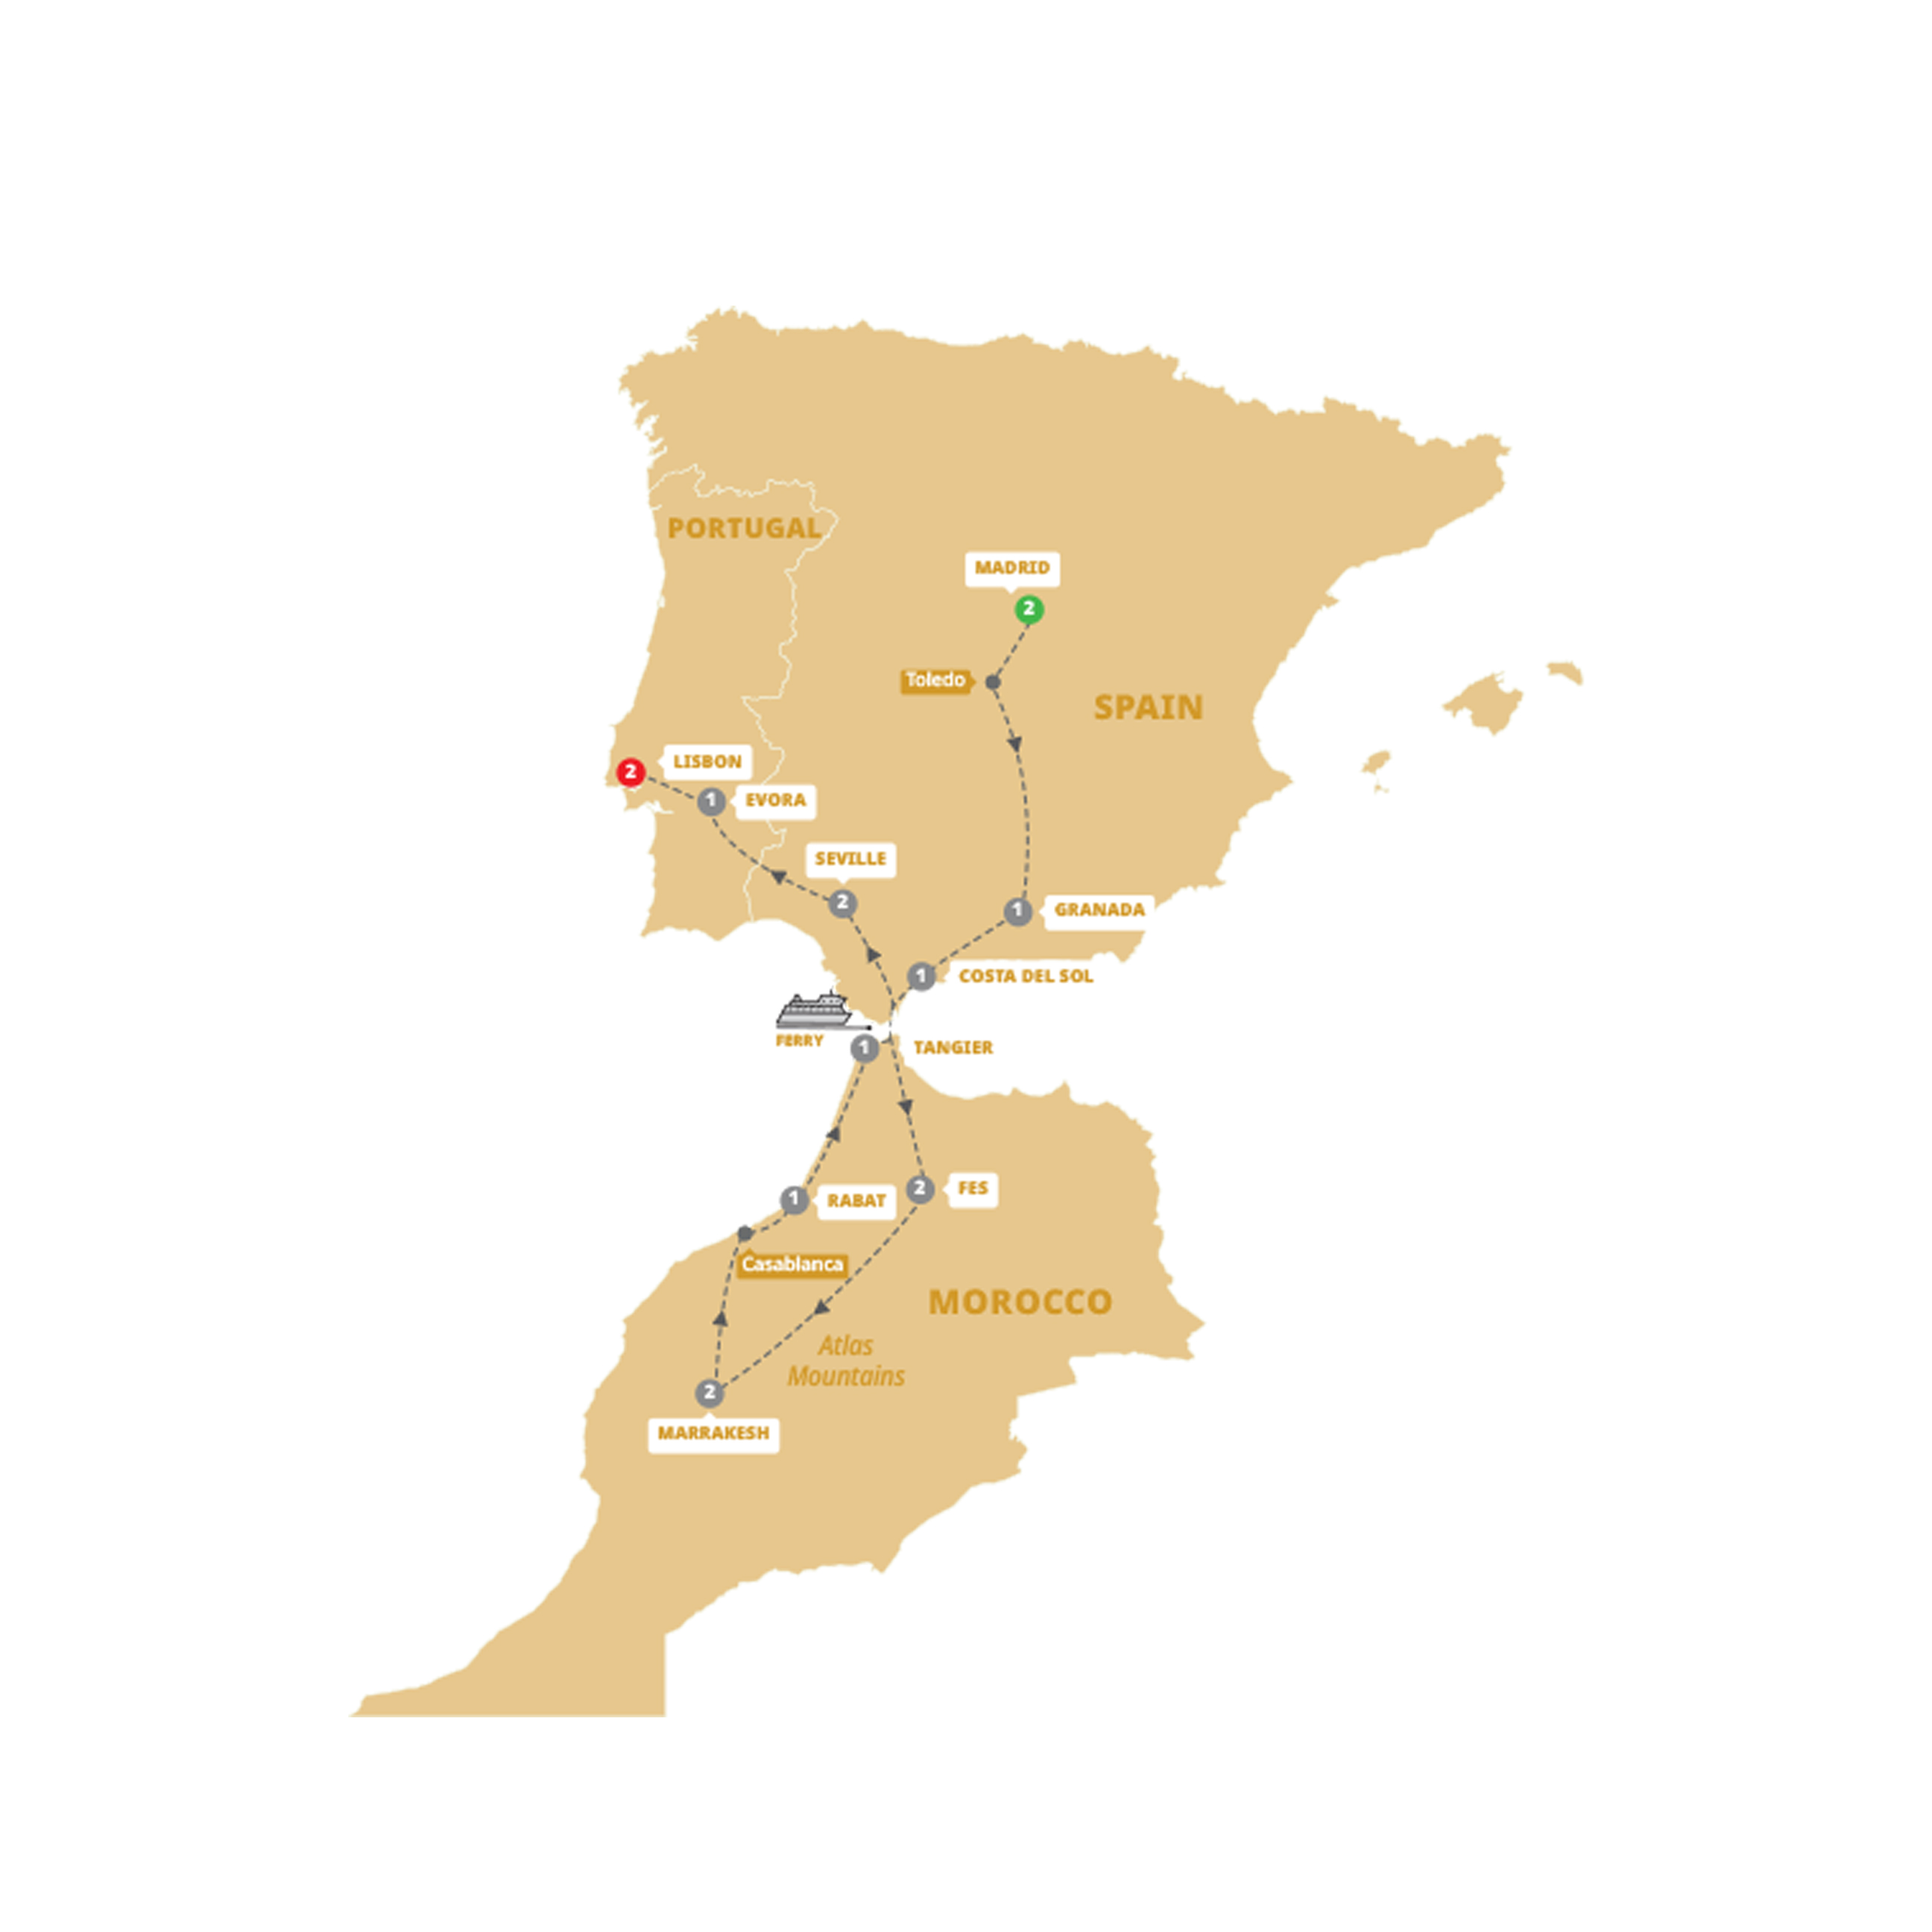 Spain, Morocco and Portugal Itinerary Map